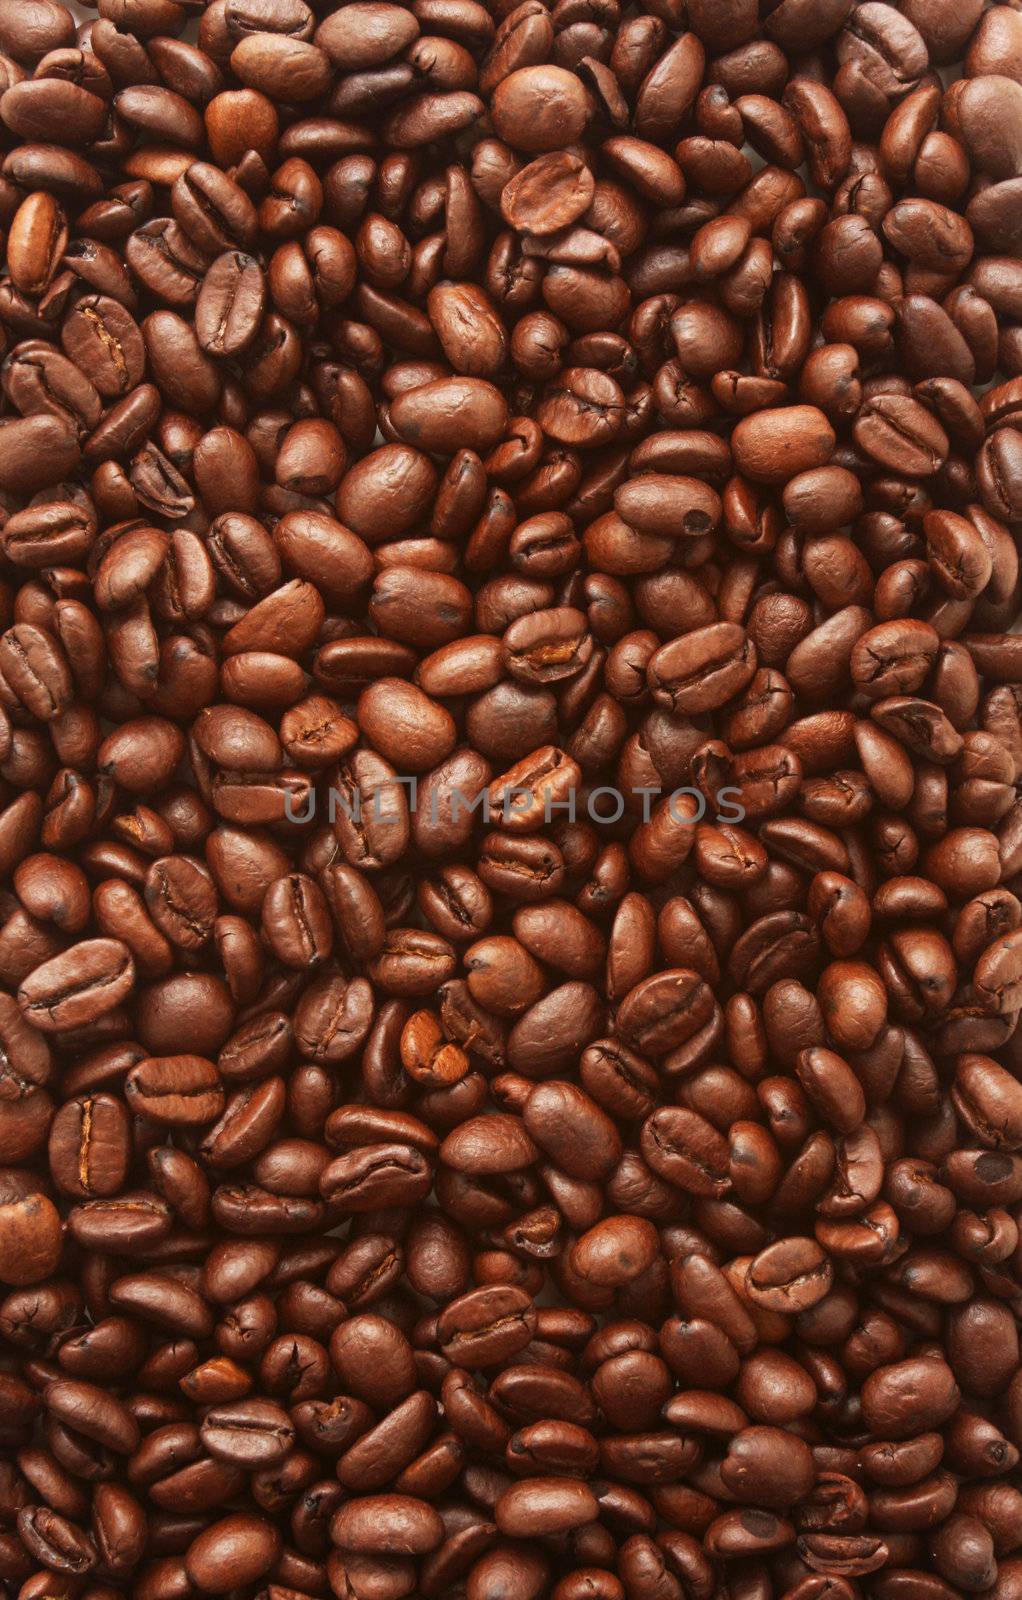 frame filling shot of coffebeans, perfect for background and backdrops